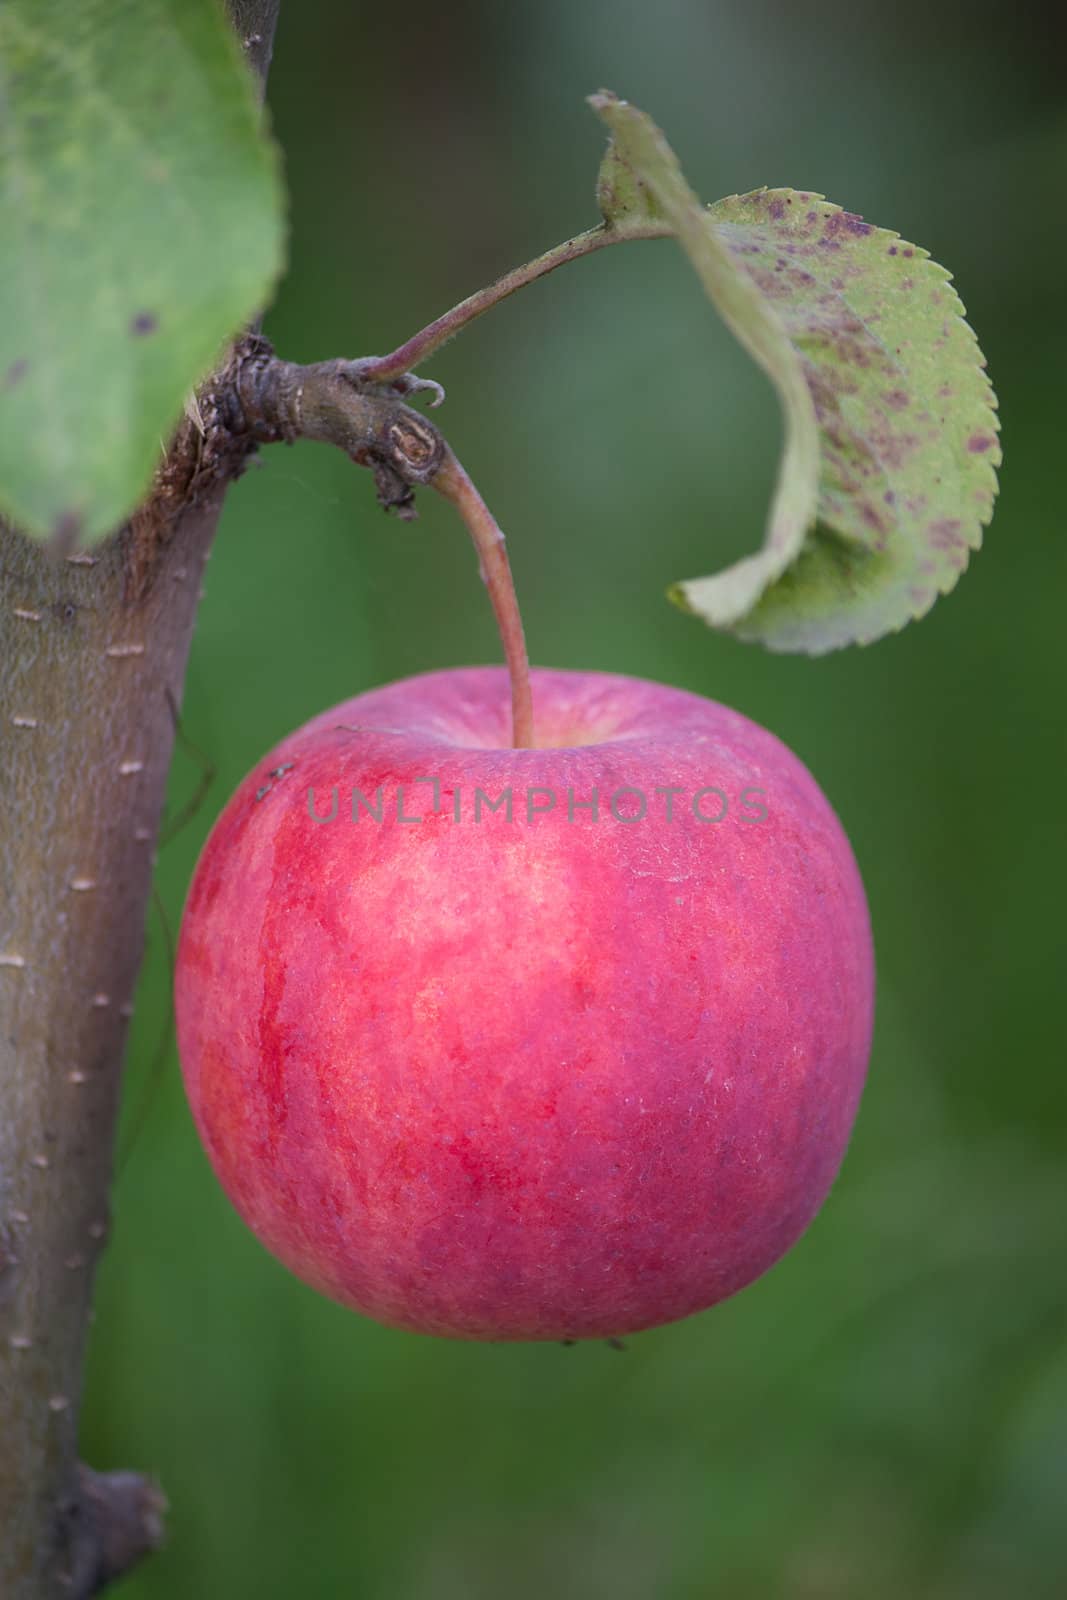 Apple on branch of apple tree in garden close up.